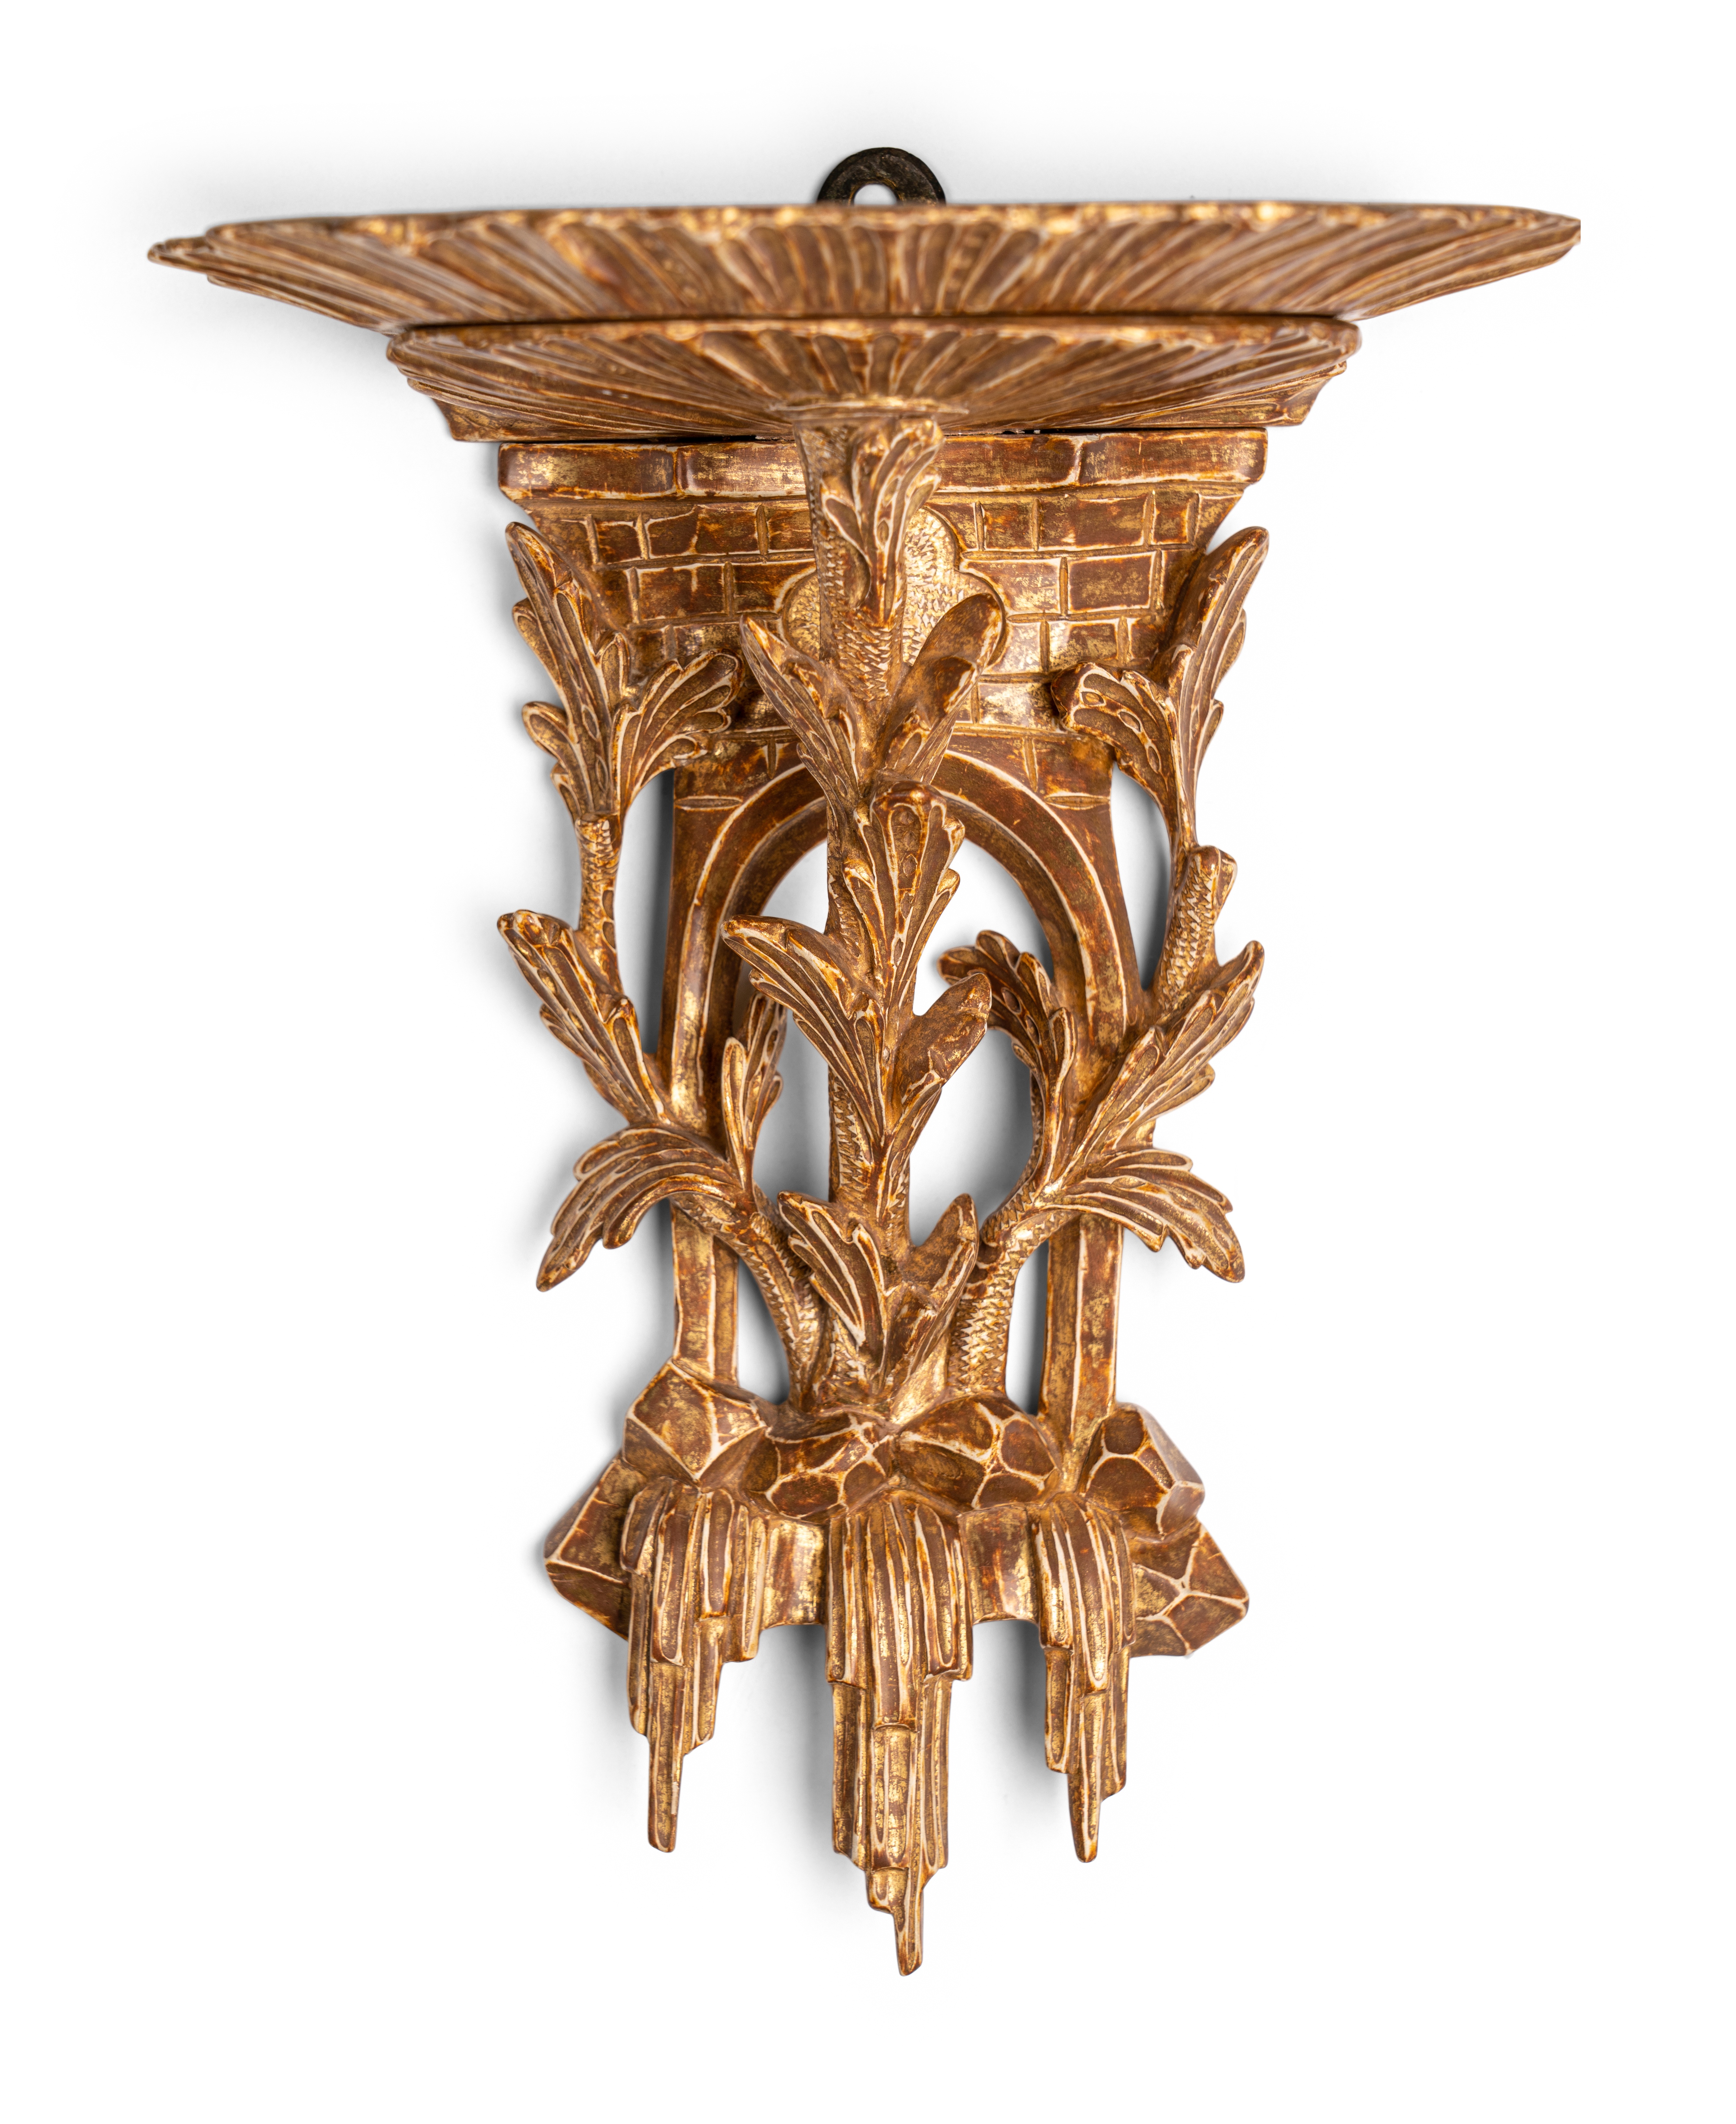 A Pair of George III Giltwood Wall Brackets - Image 2 of 7